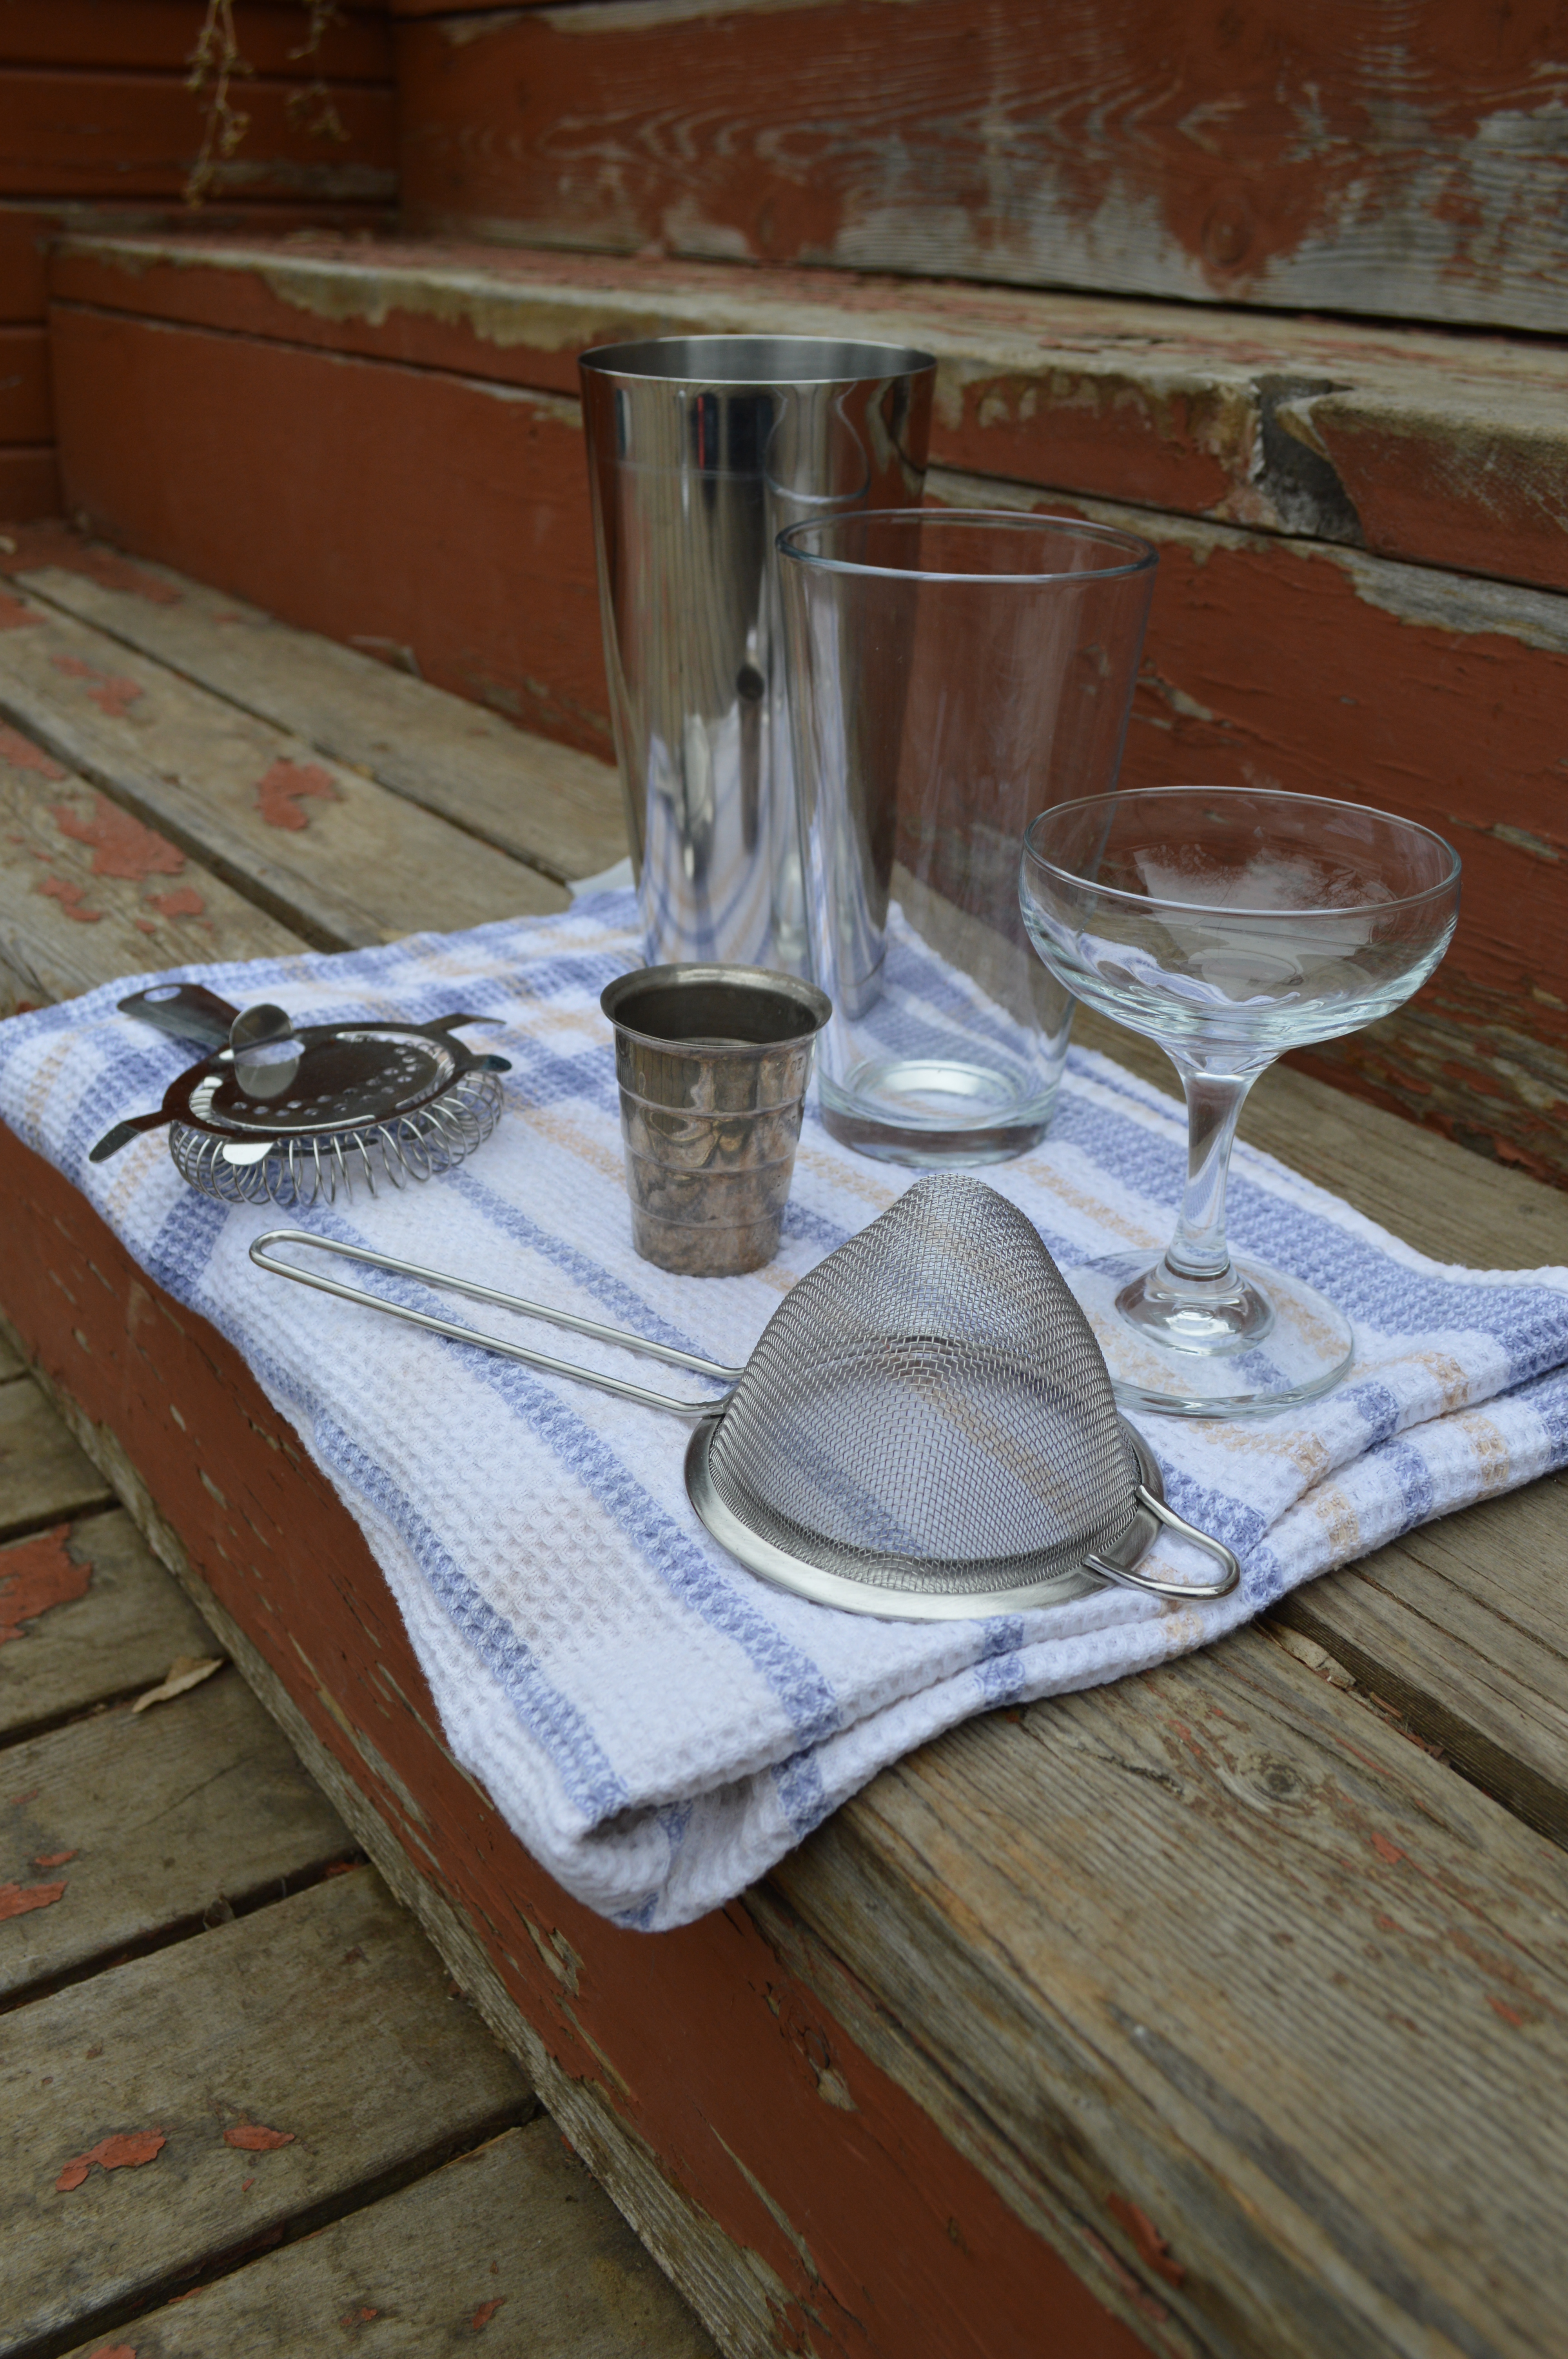 The equipment required for making a shaken cocktail: Boston shaker, Hawthorne strainer, and fine mesh strainer.